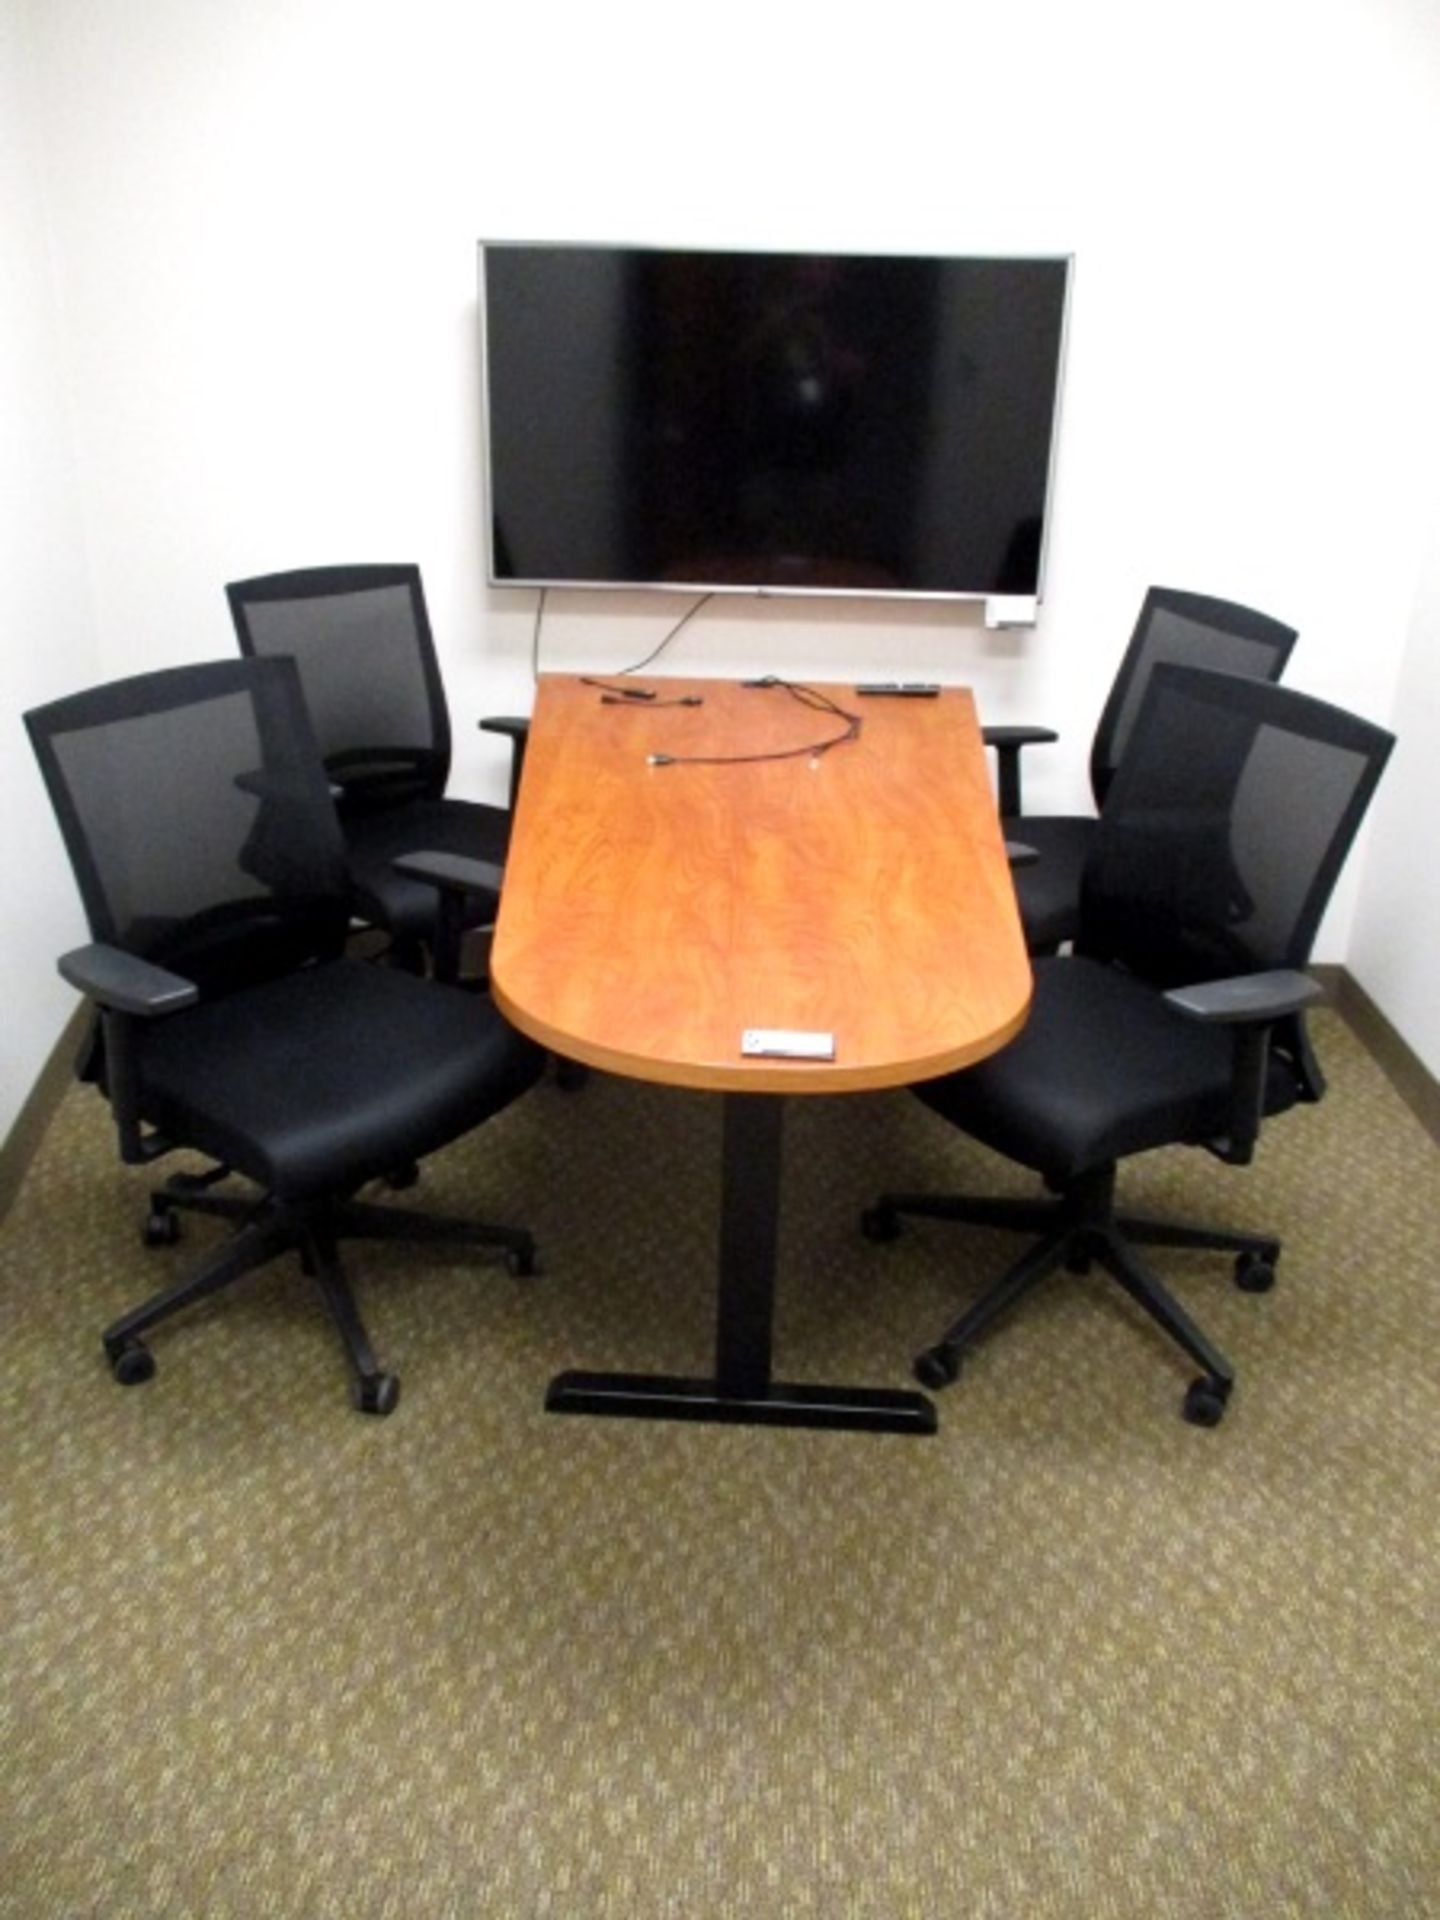 6' x 2'-3' Conference Table and (4) chairs